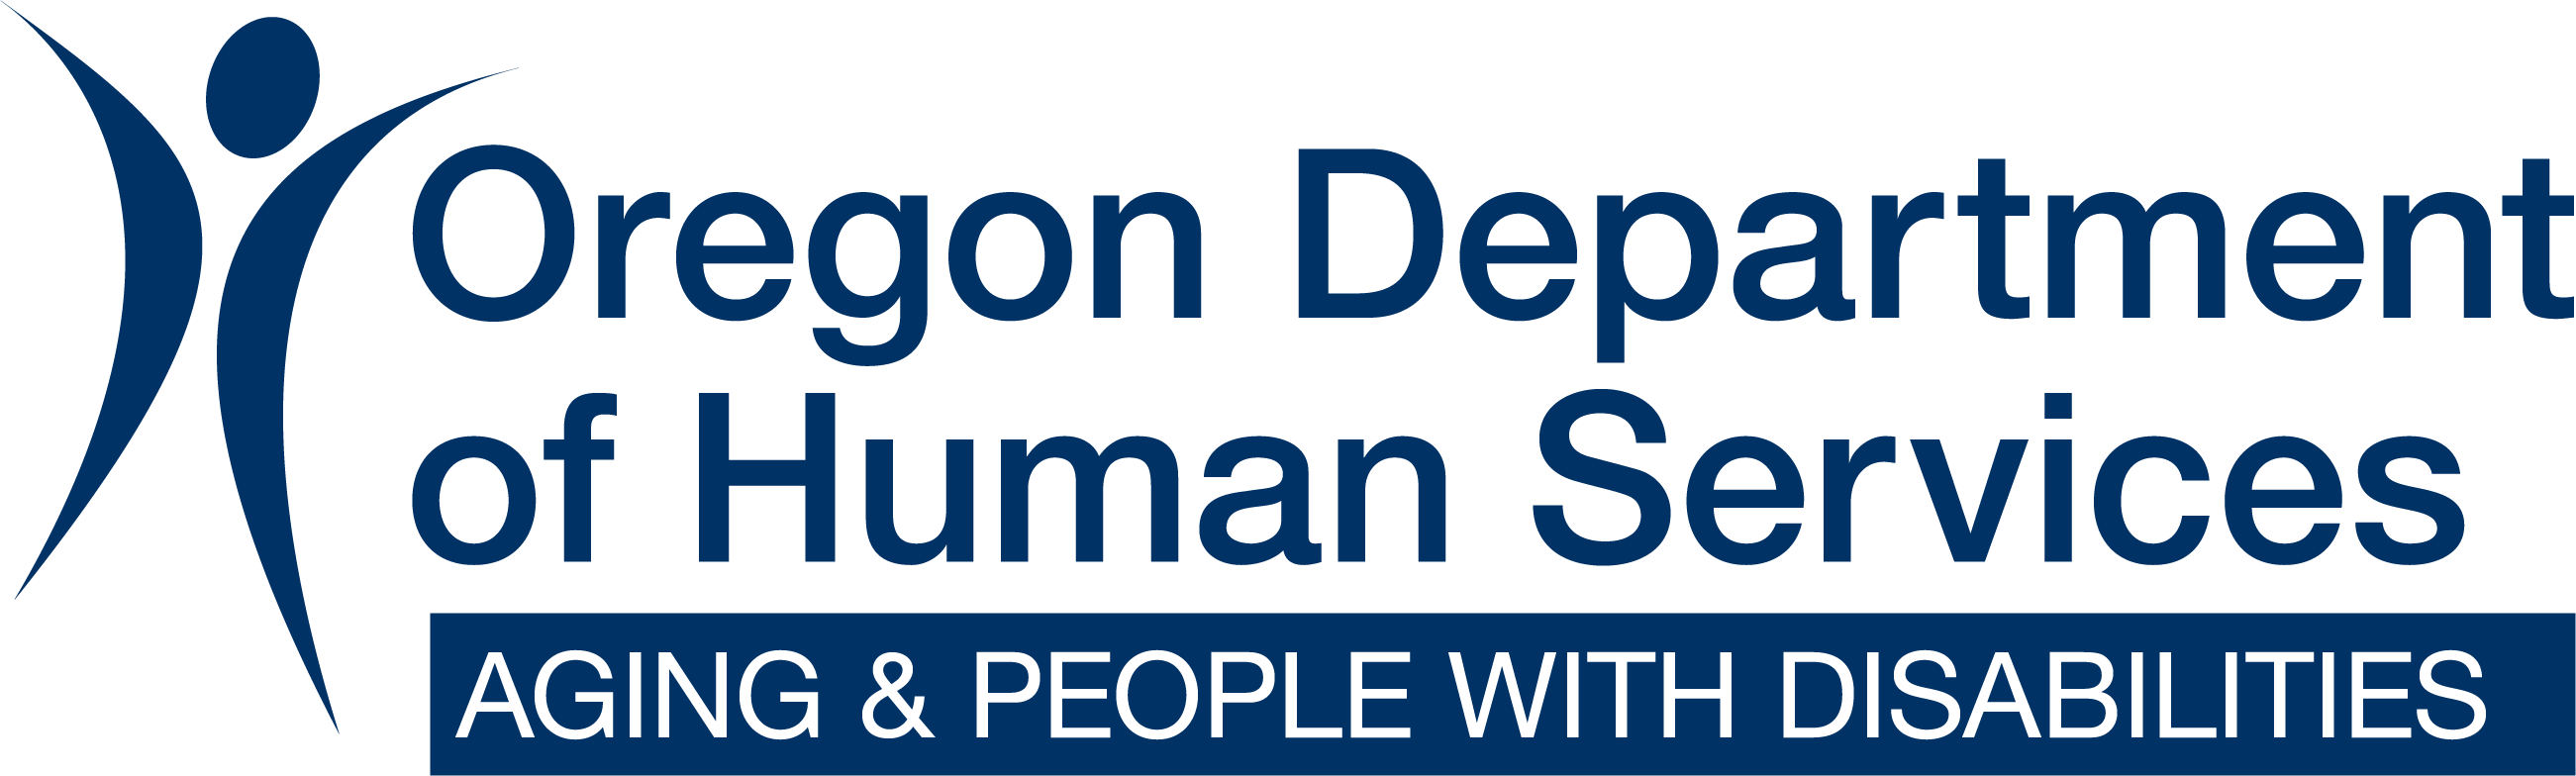 Oregon Department of Human Services Aging and People with Disabilities